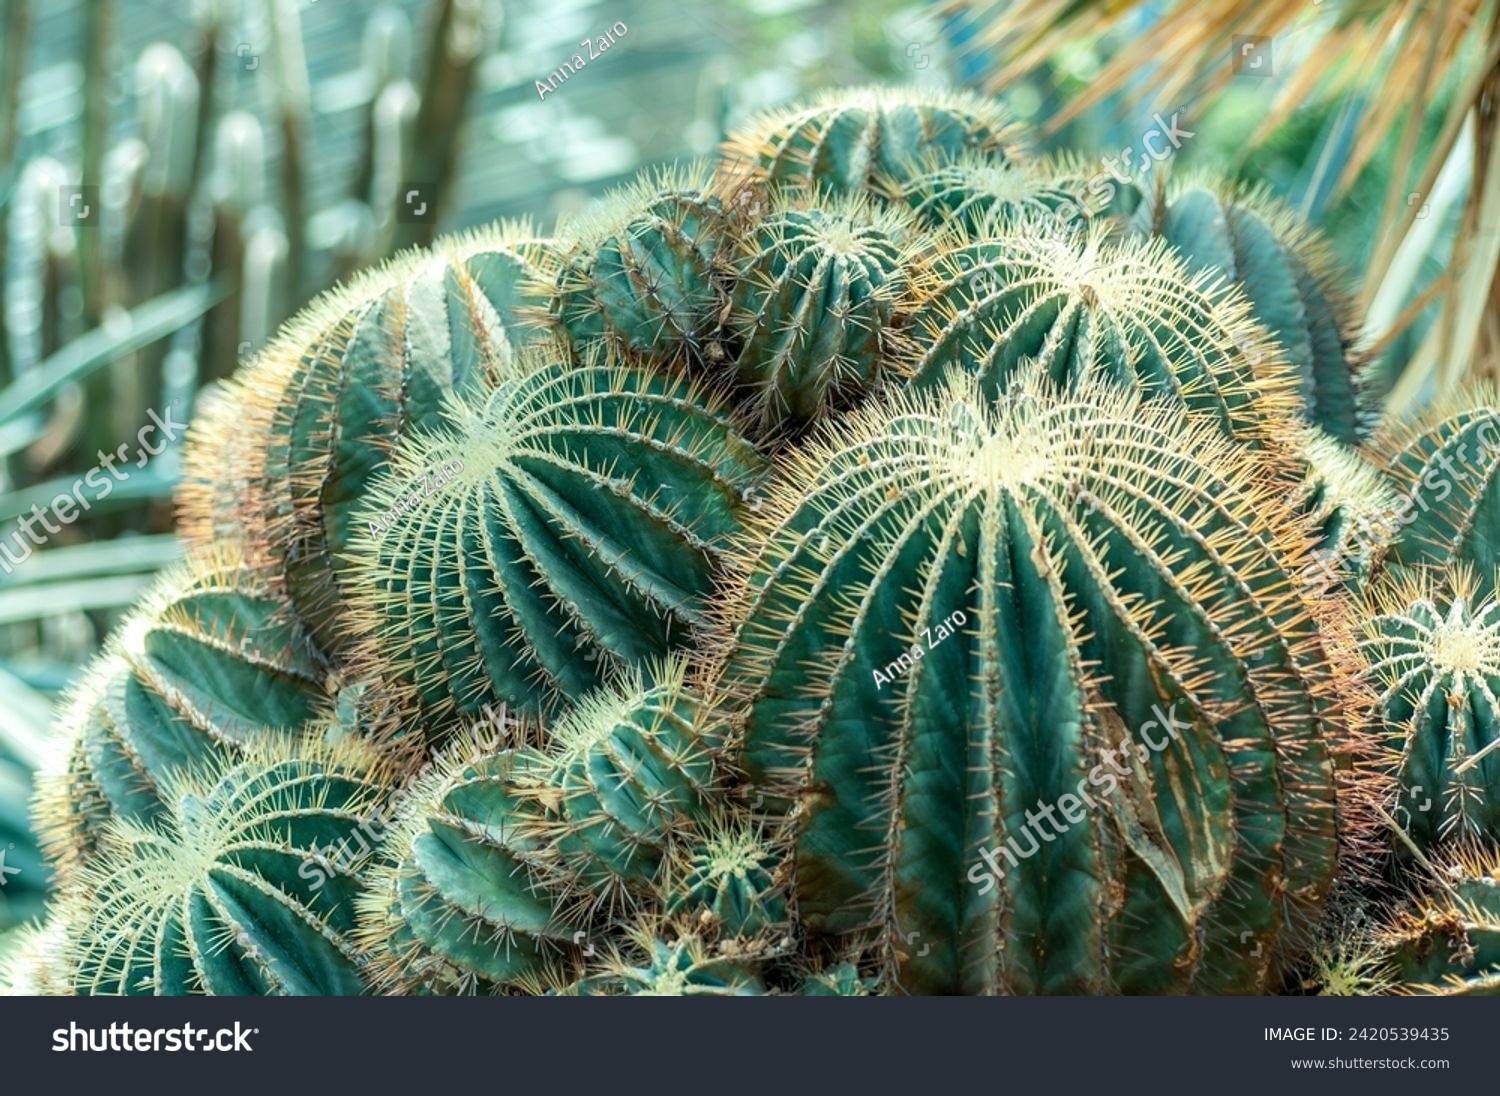 Close-up view of a cluster of cacti, capturing the intricate details and textures of these desert plants. Perfect for illustrating the beauty of succulents and arid landscapes. #2420539435